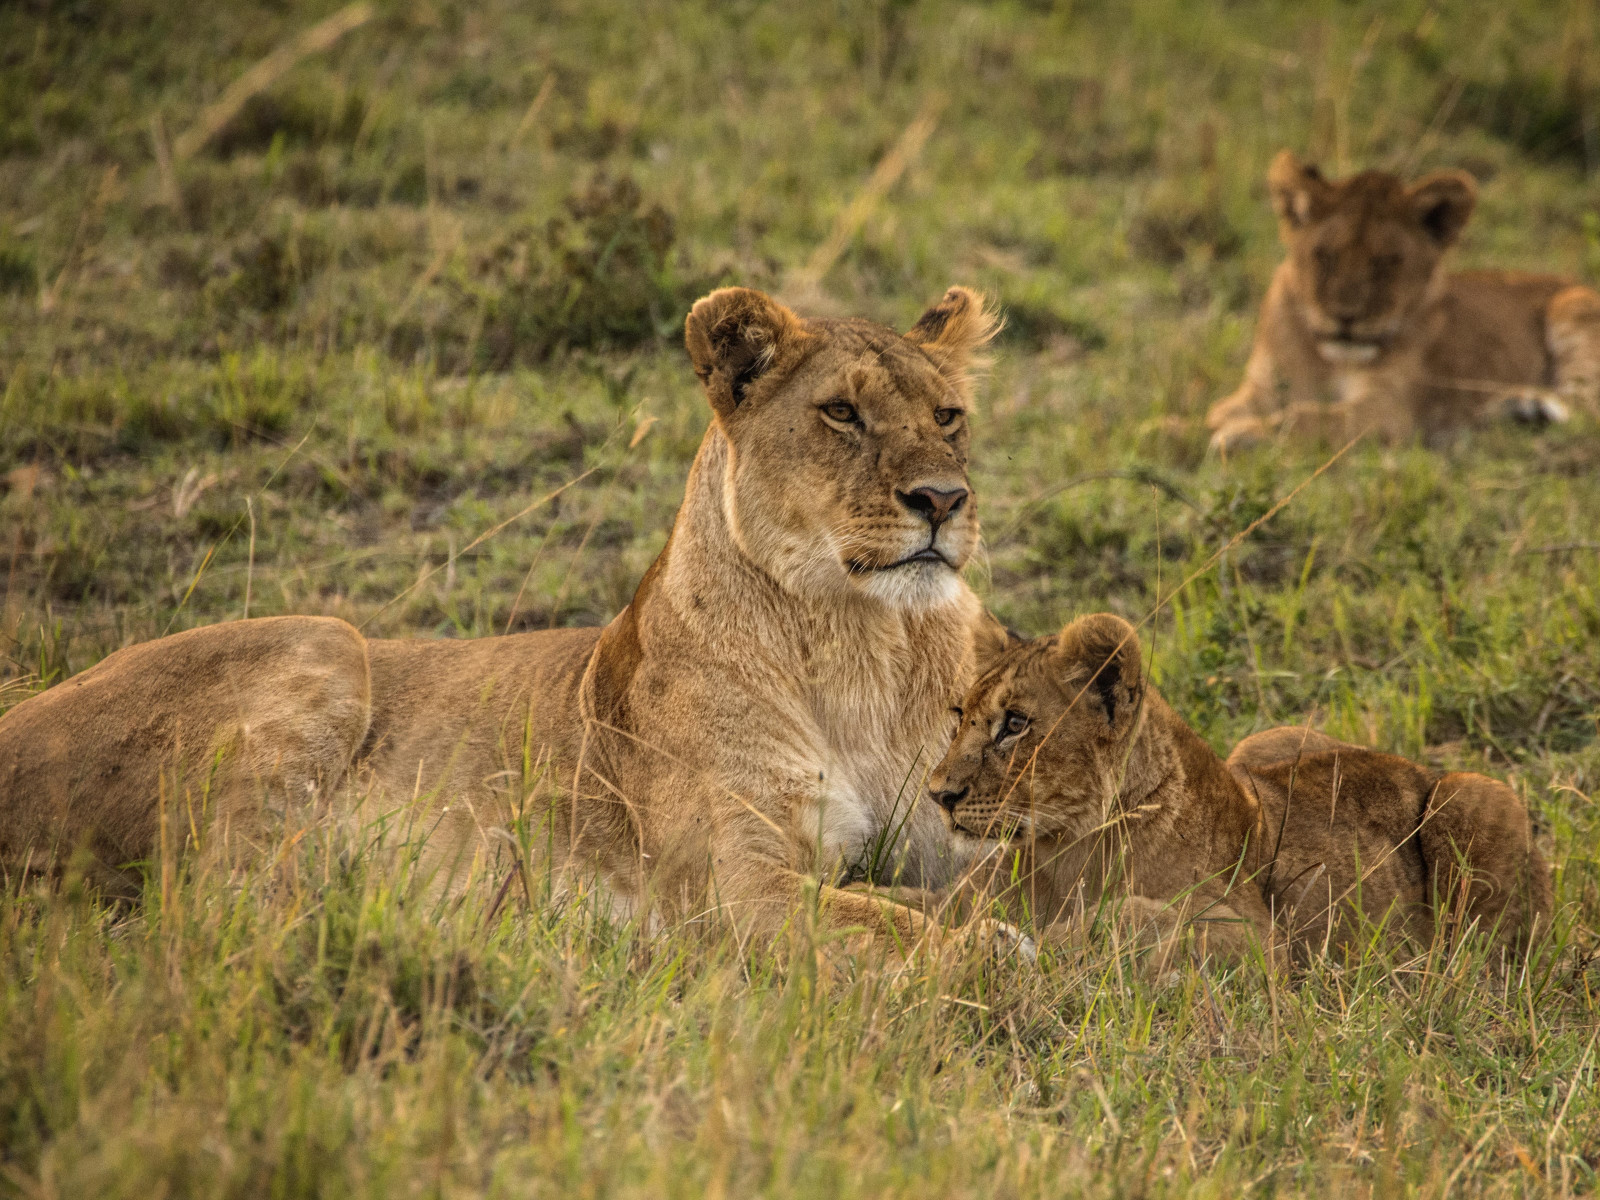 Lioness with cubs from Serengeti wallpaper 1600x1200